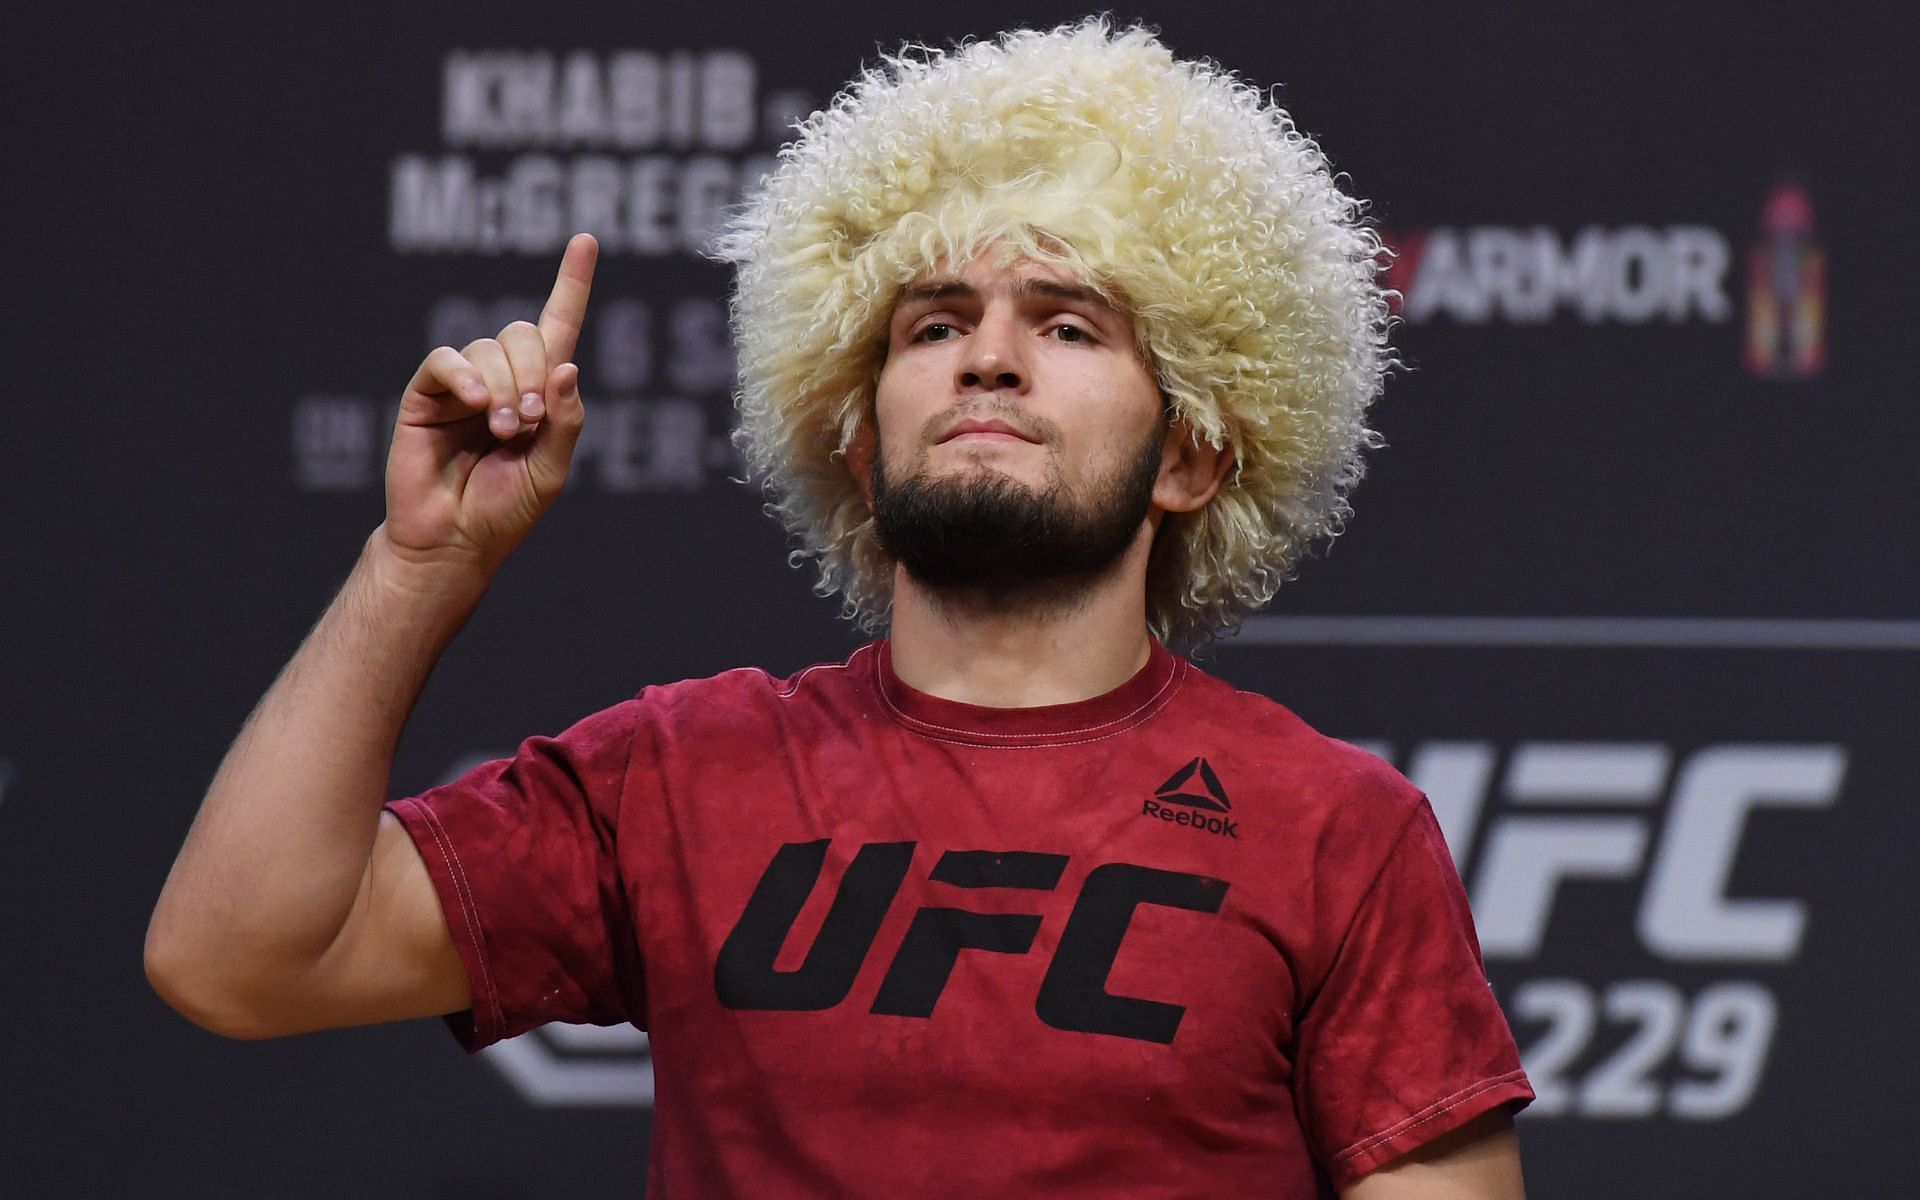 MMA great Khabib Nurmagomedov was inducted into the UFC Hall of Fame on July 1st, 2022